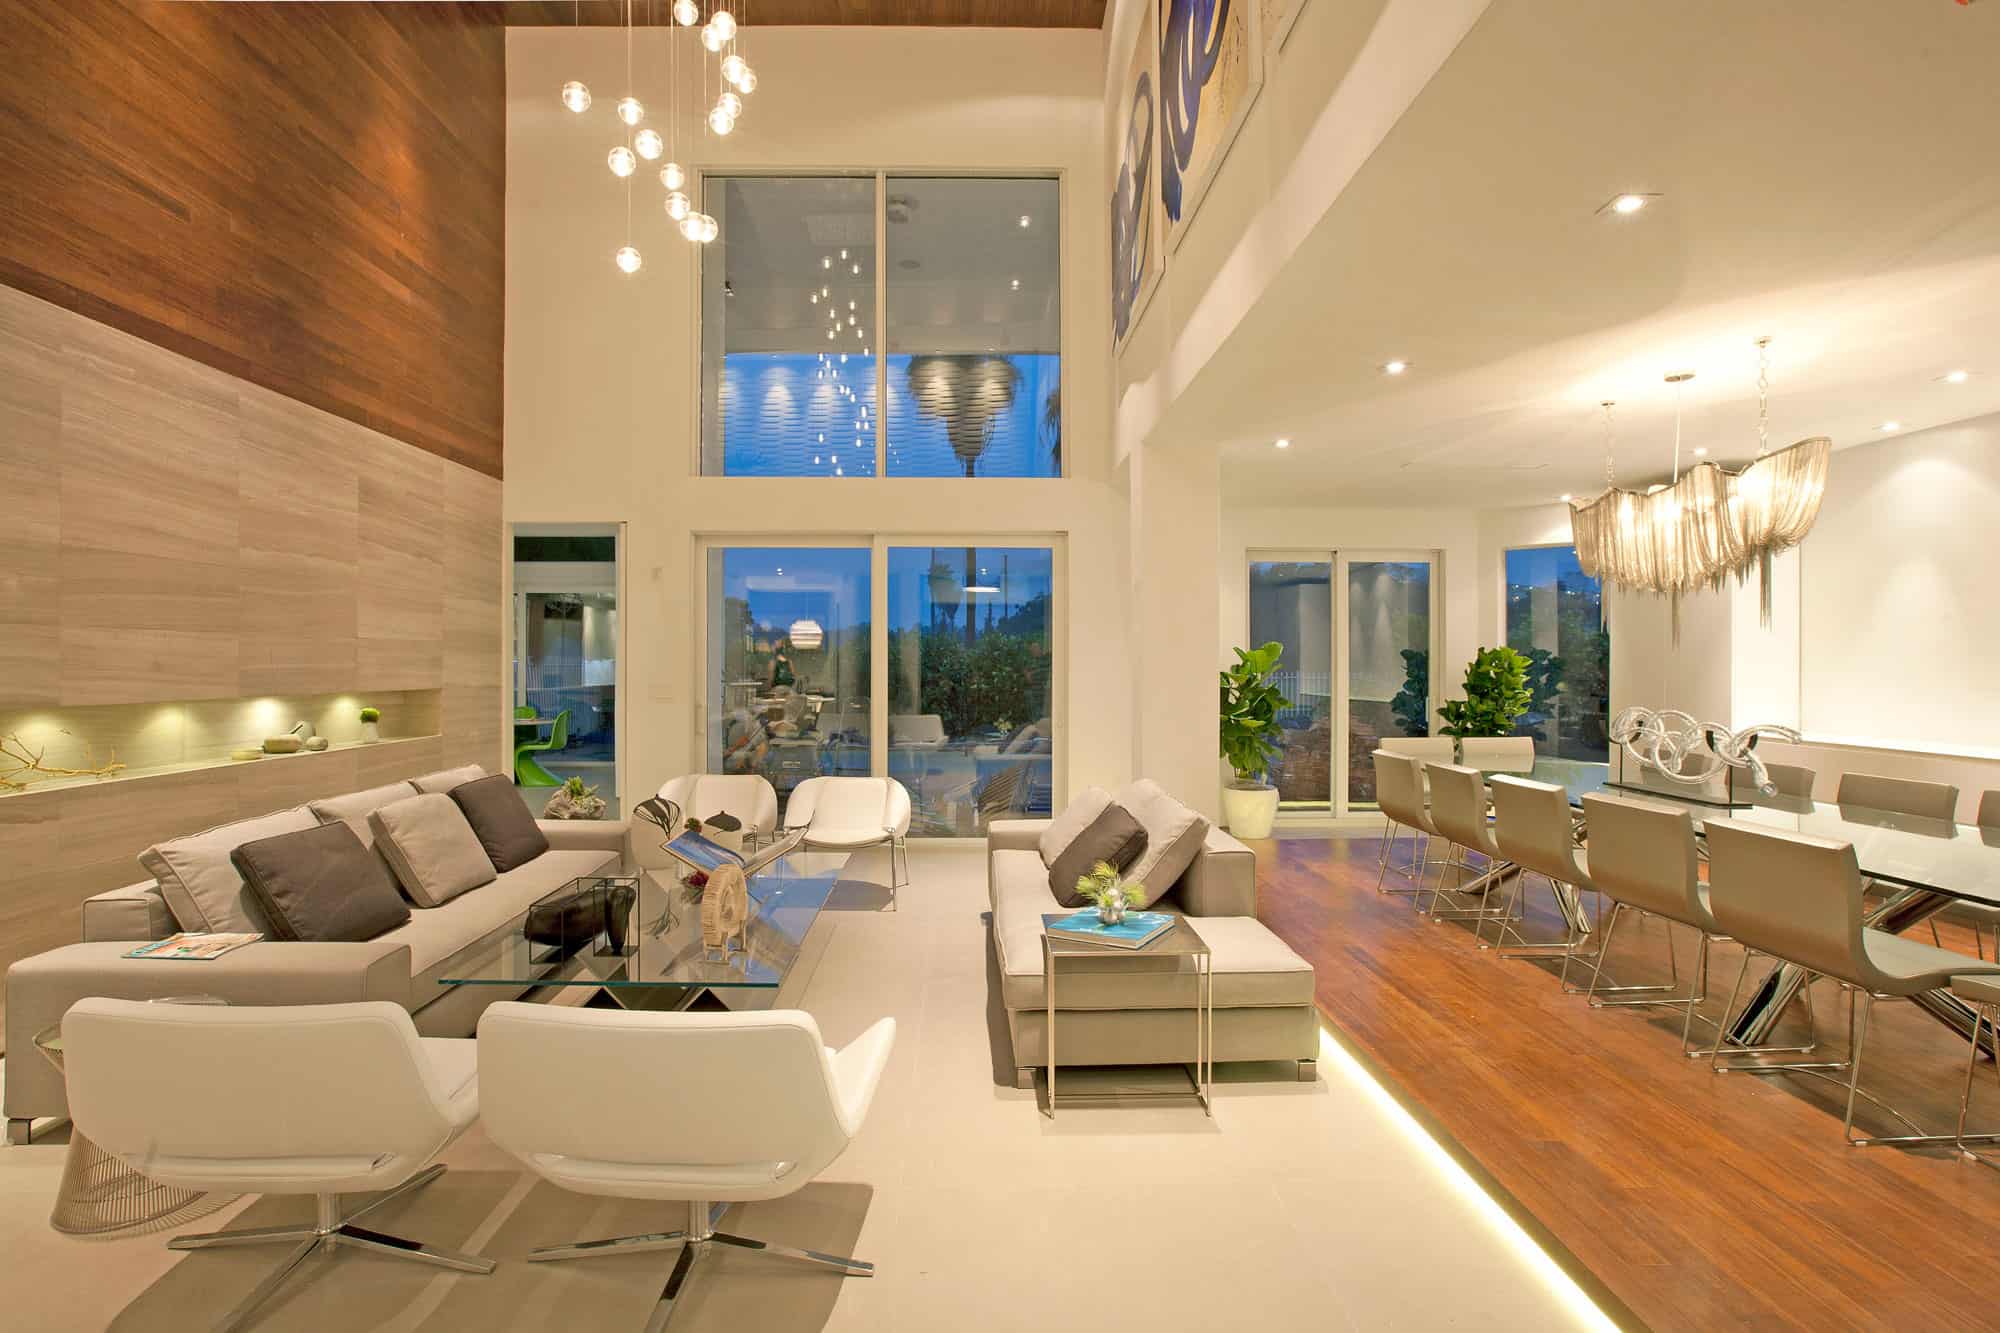 Top 10 luxury home interior design ideas you need to know